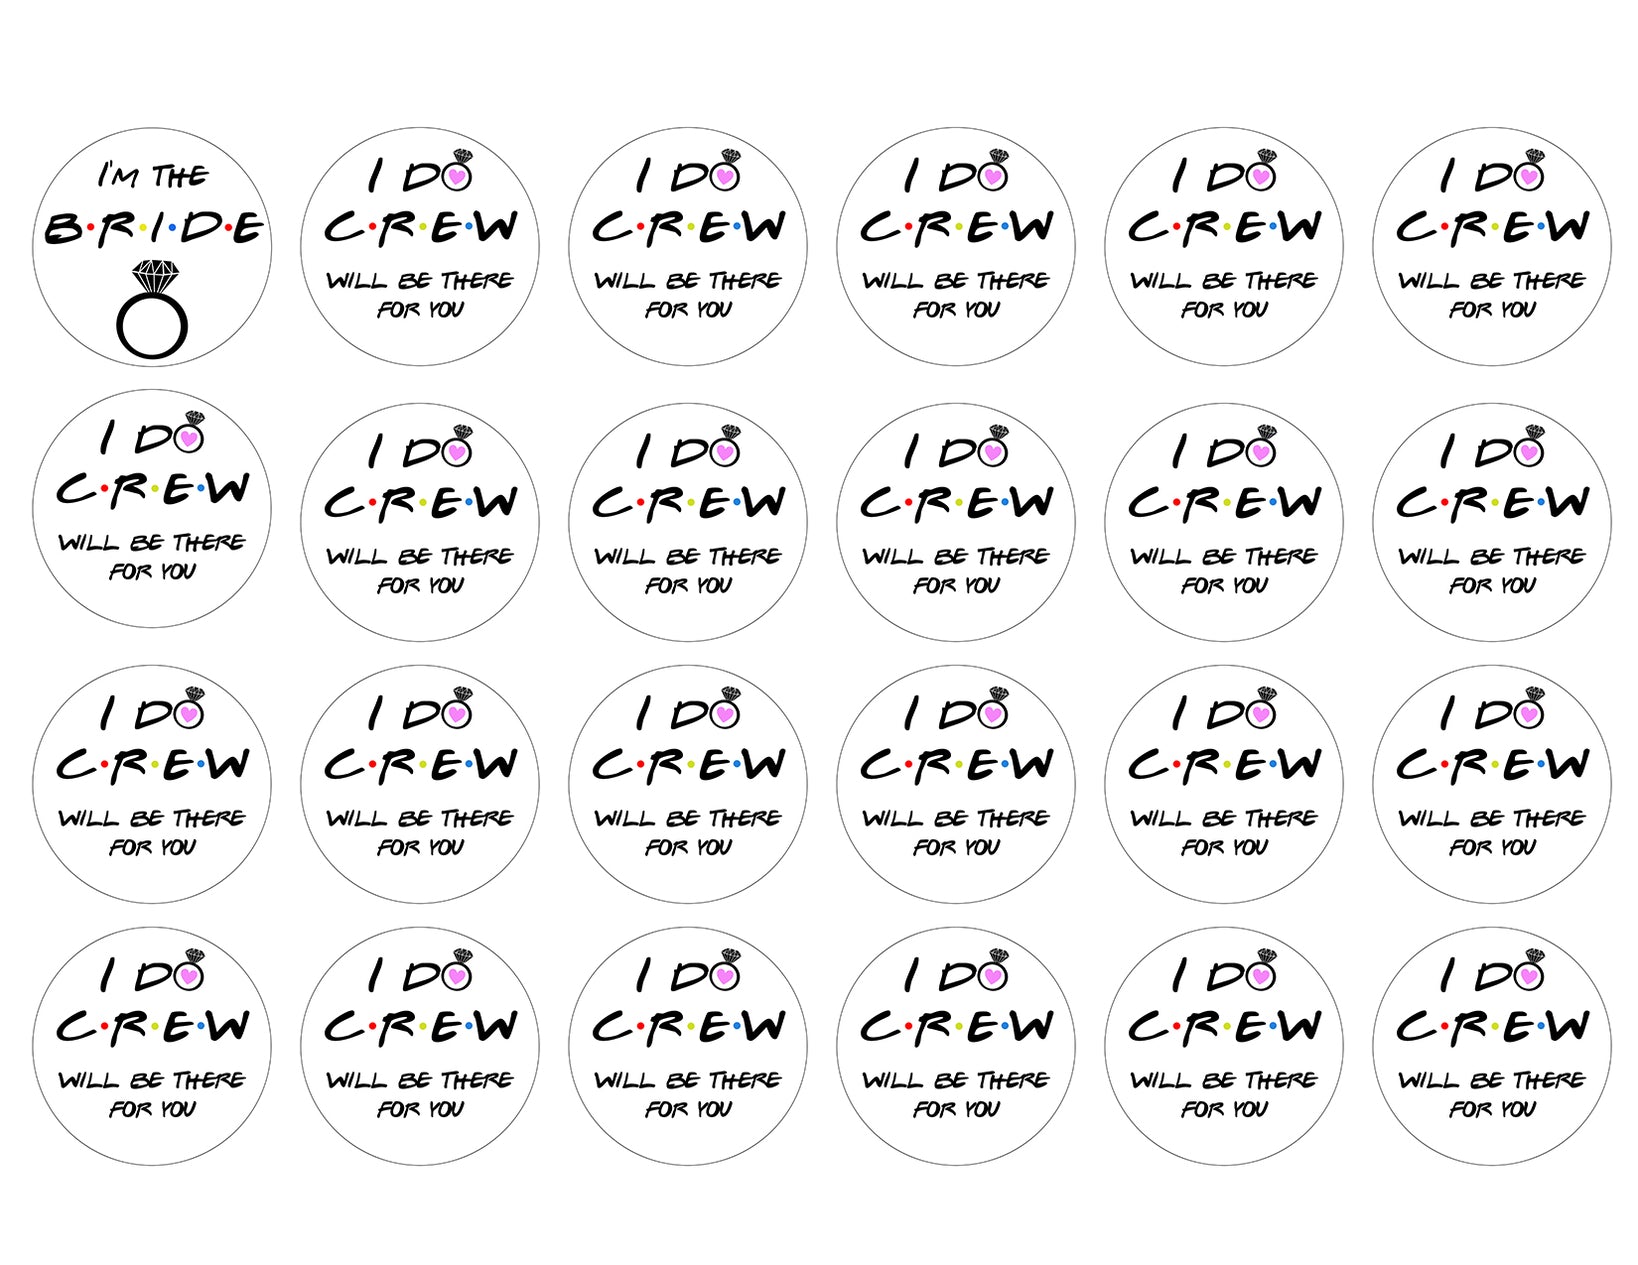 Wedding Bridal Bachelorette Party I Do Crew Will Be There for You 24ct Edible Cupcake Topper Images ABPID51148